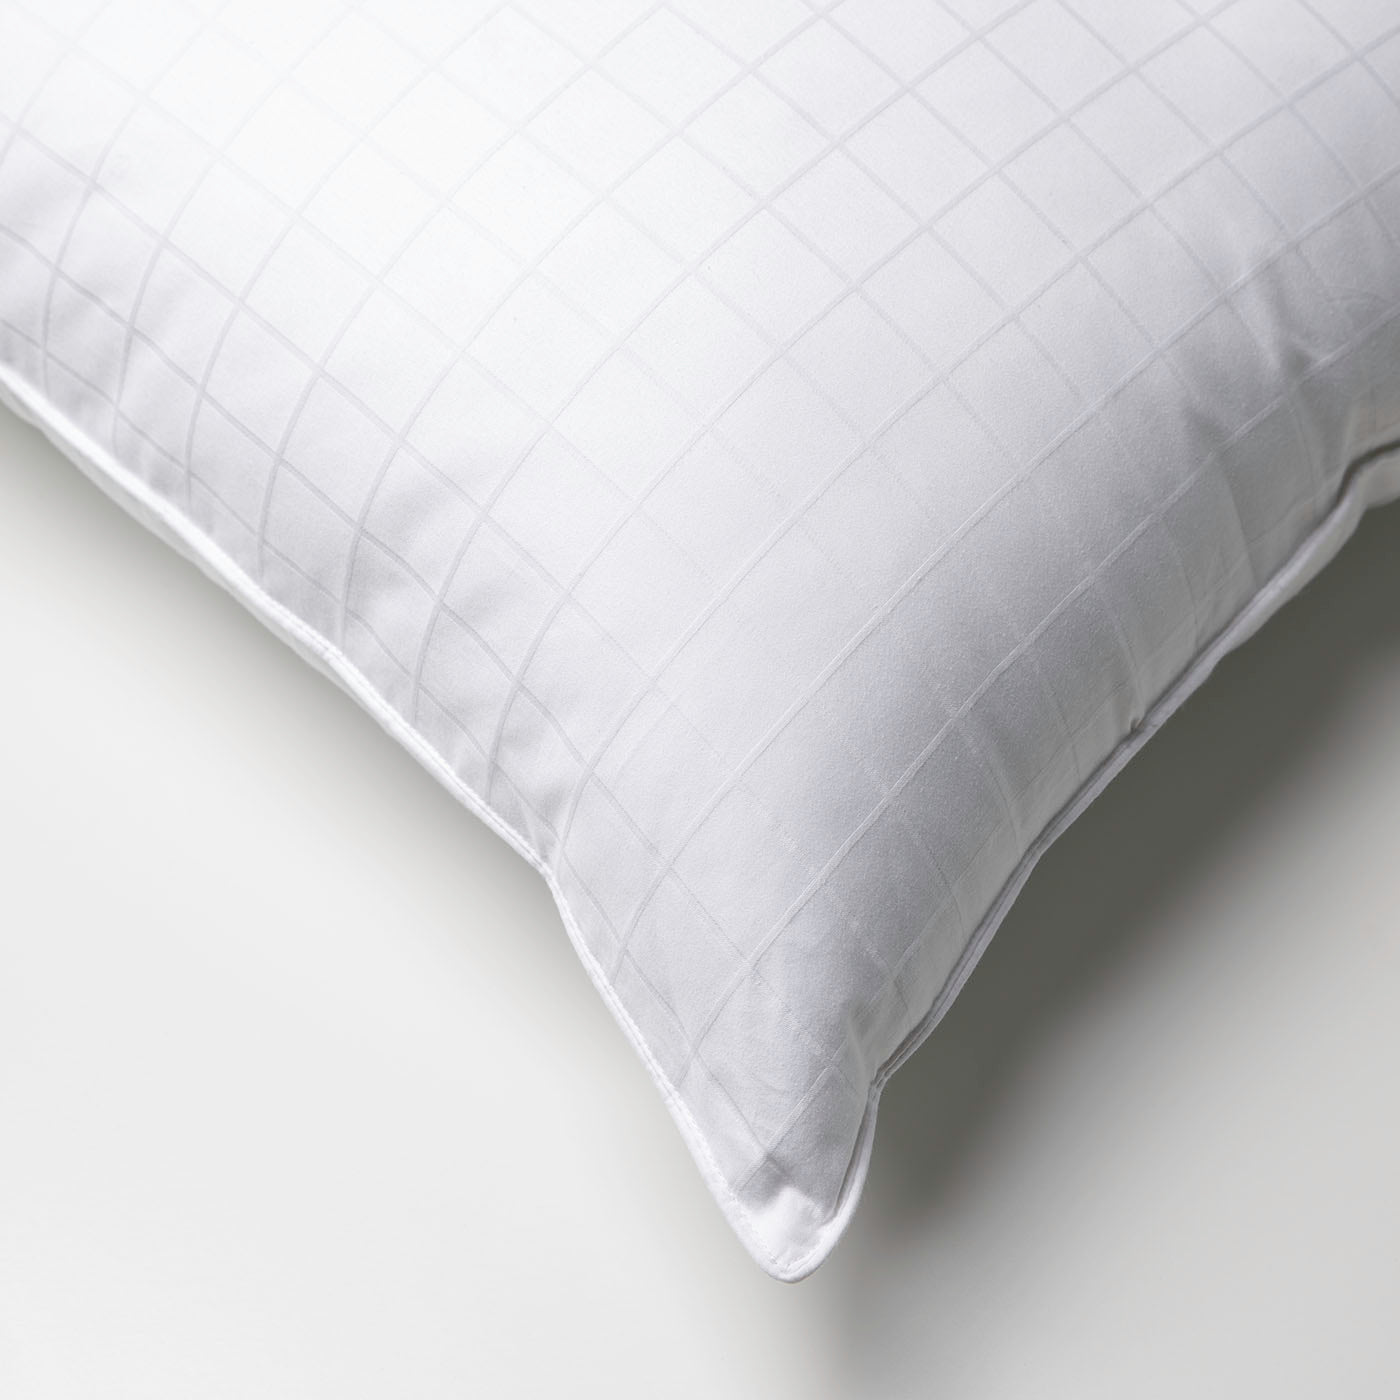 Sobel Westex: Sobella Supremo Side and Stomach Sleeper Pillow | Hotel and  Resort Quality, 300 Thread Count 100% Cotton Casing | Gel Fiber Fill,  Gentle